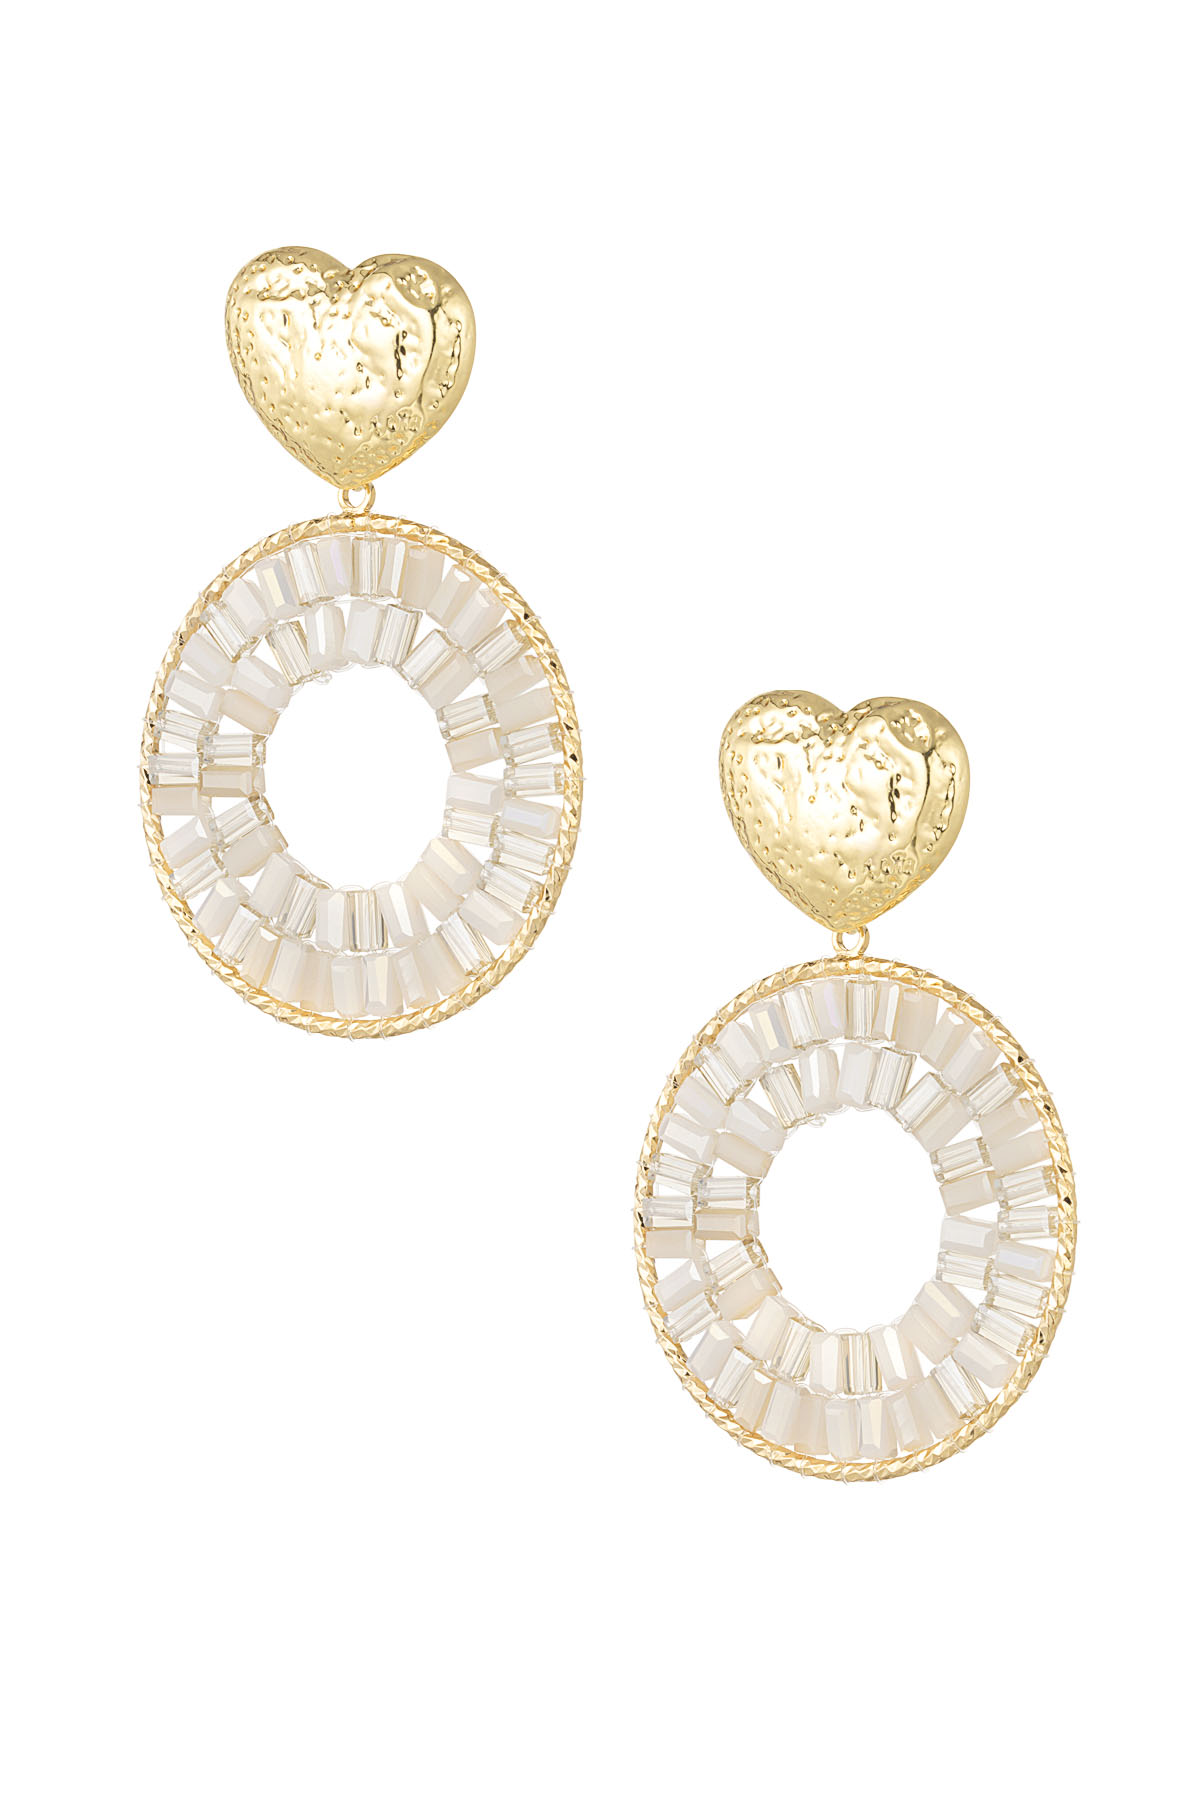 Round statement earrings with heart detail - champagne